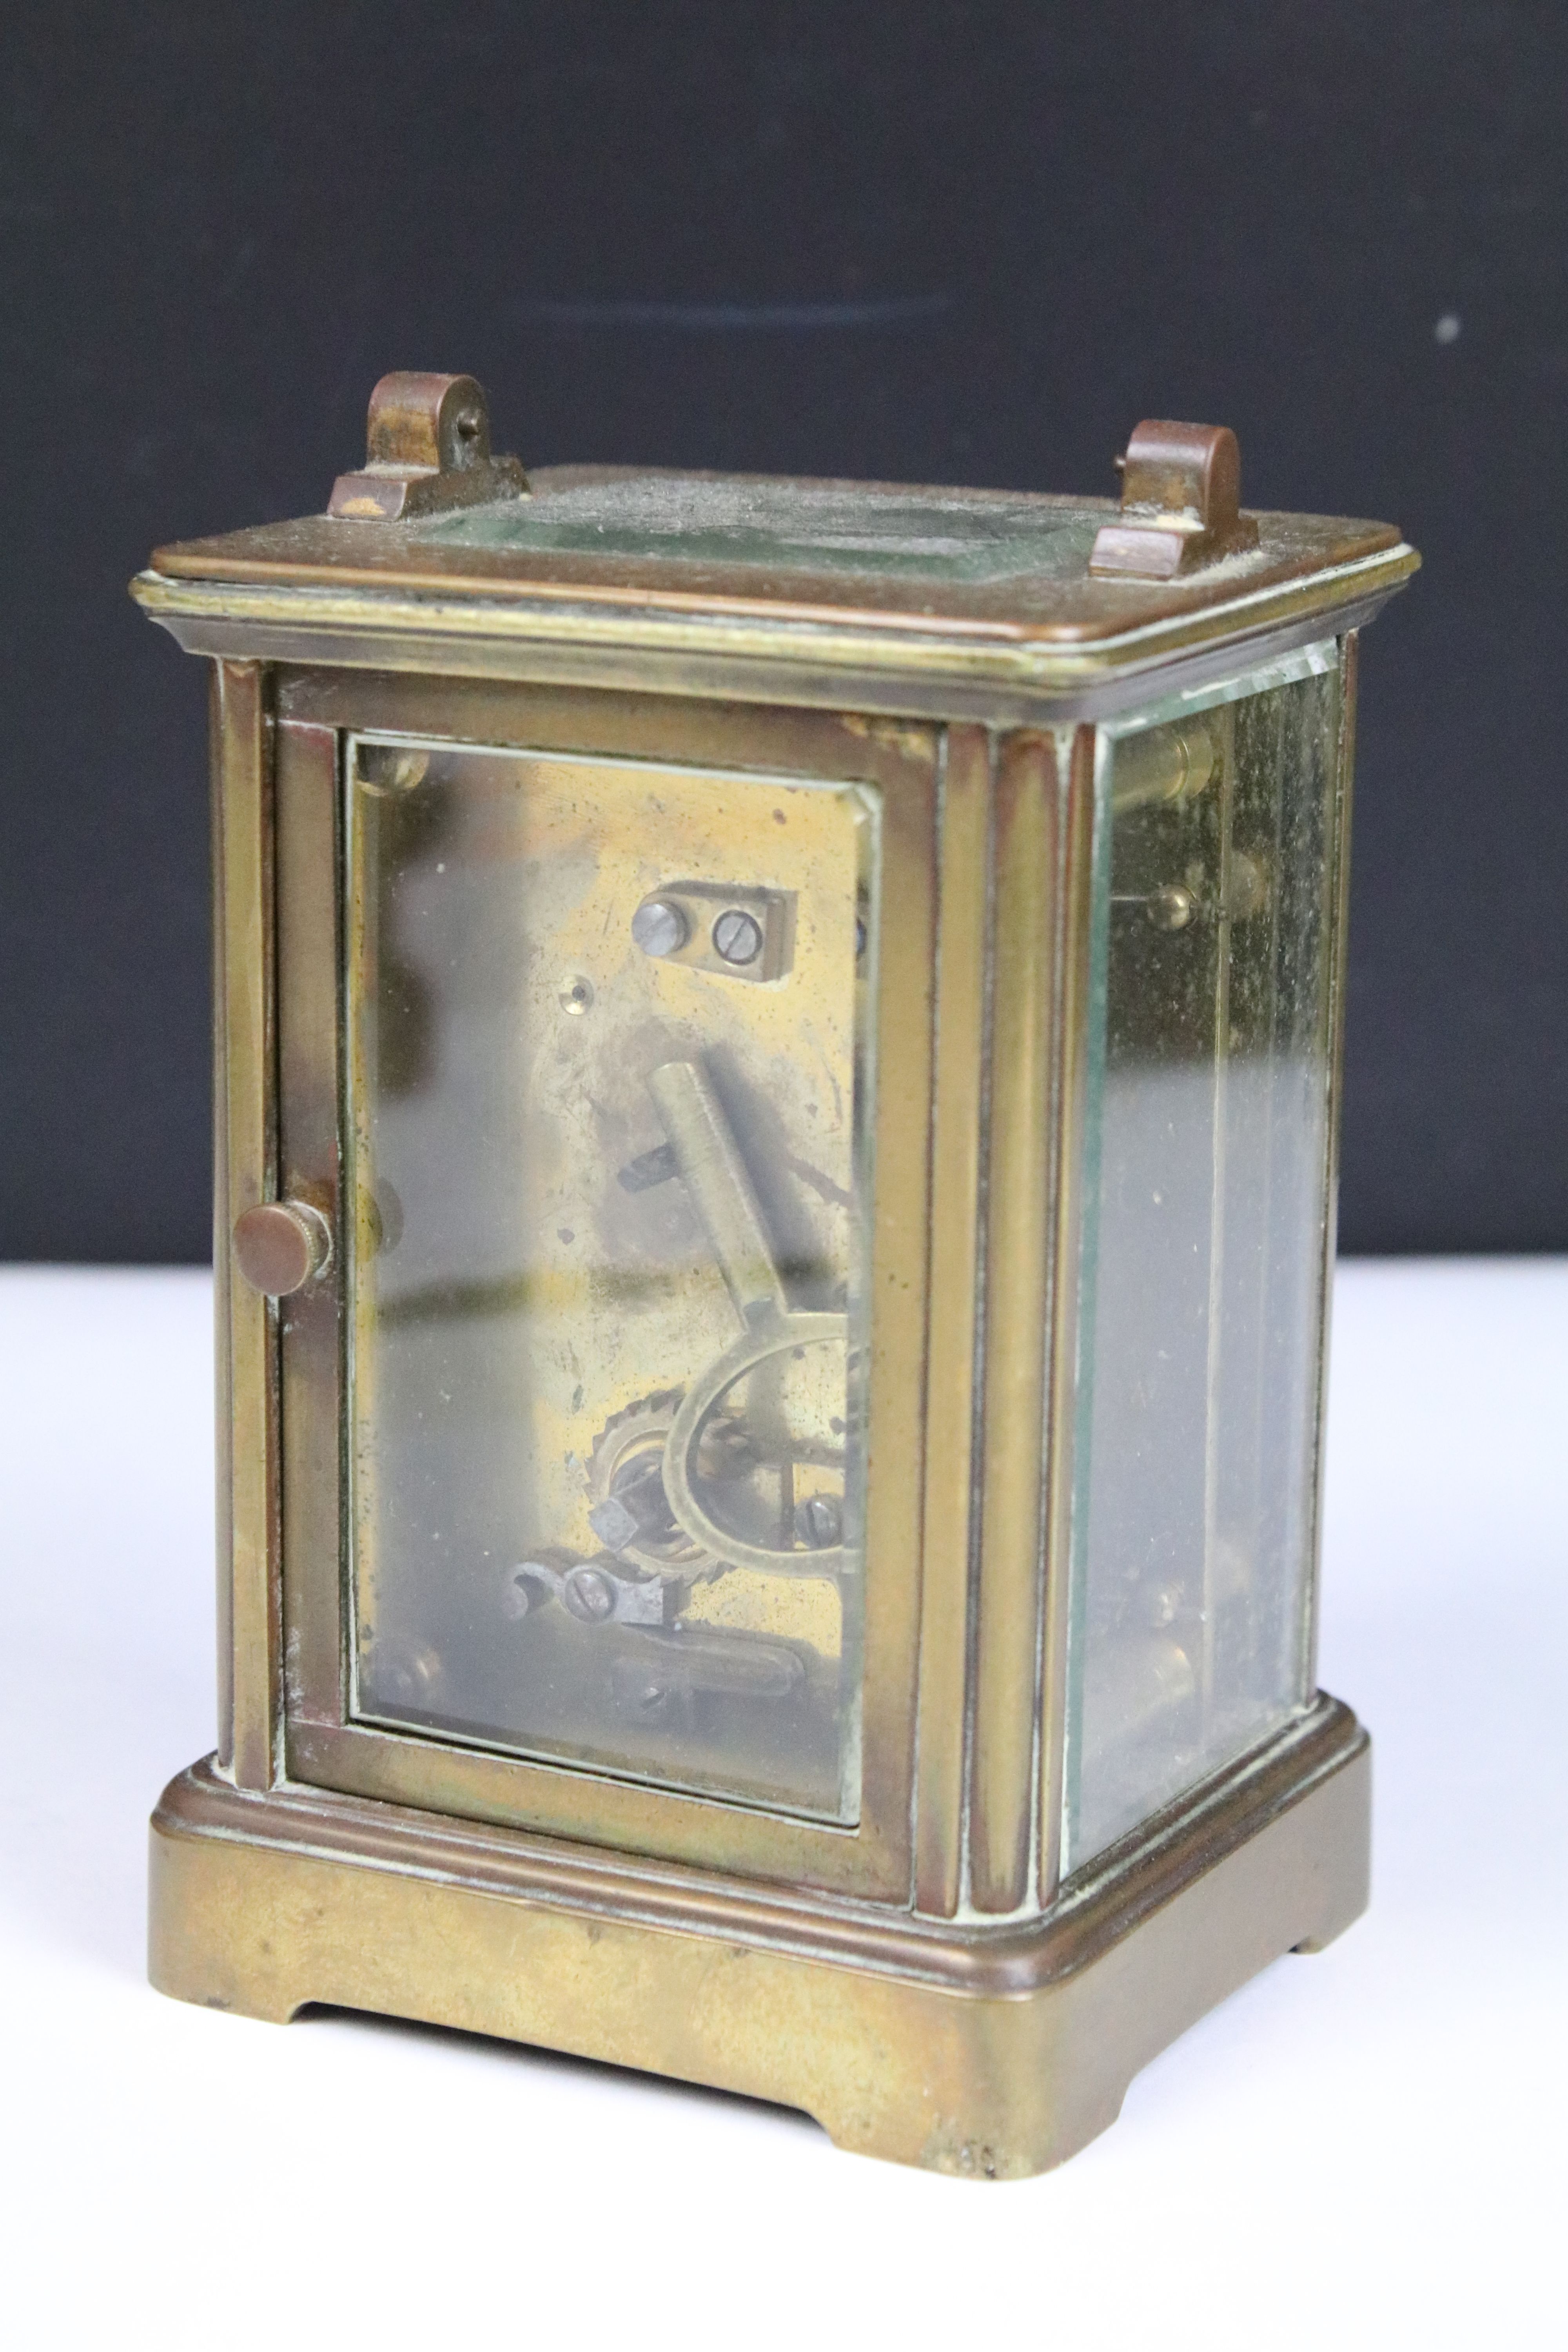 Two vintage brass cased carriage clocks with beveled glass panels and white enamel dials. - Image 3 of 8